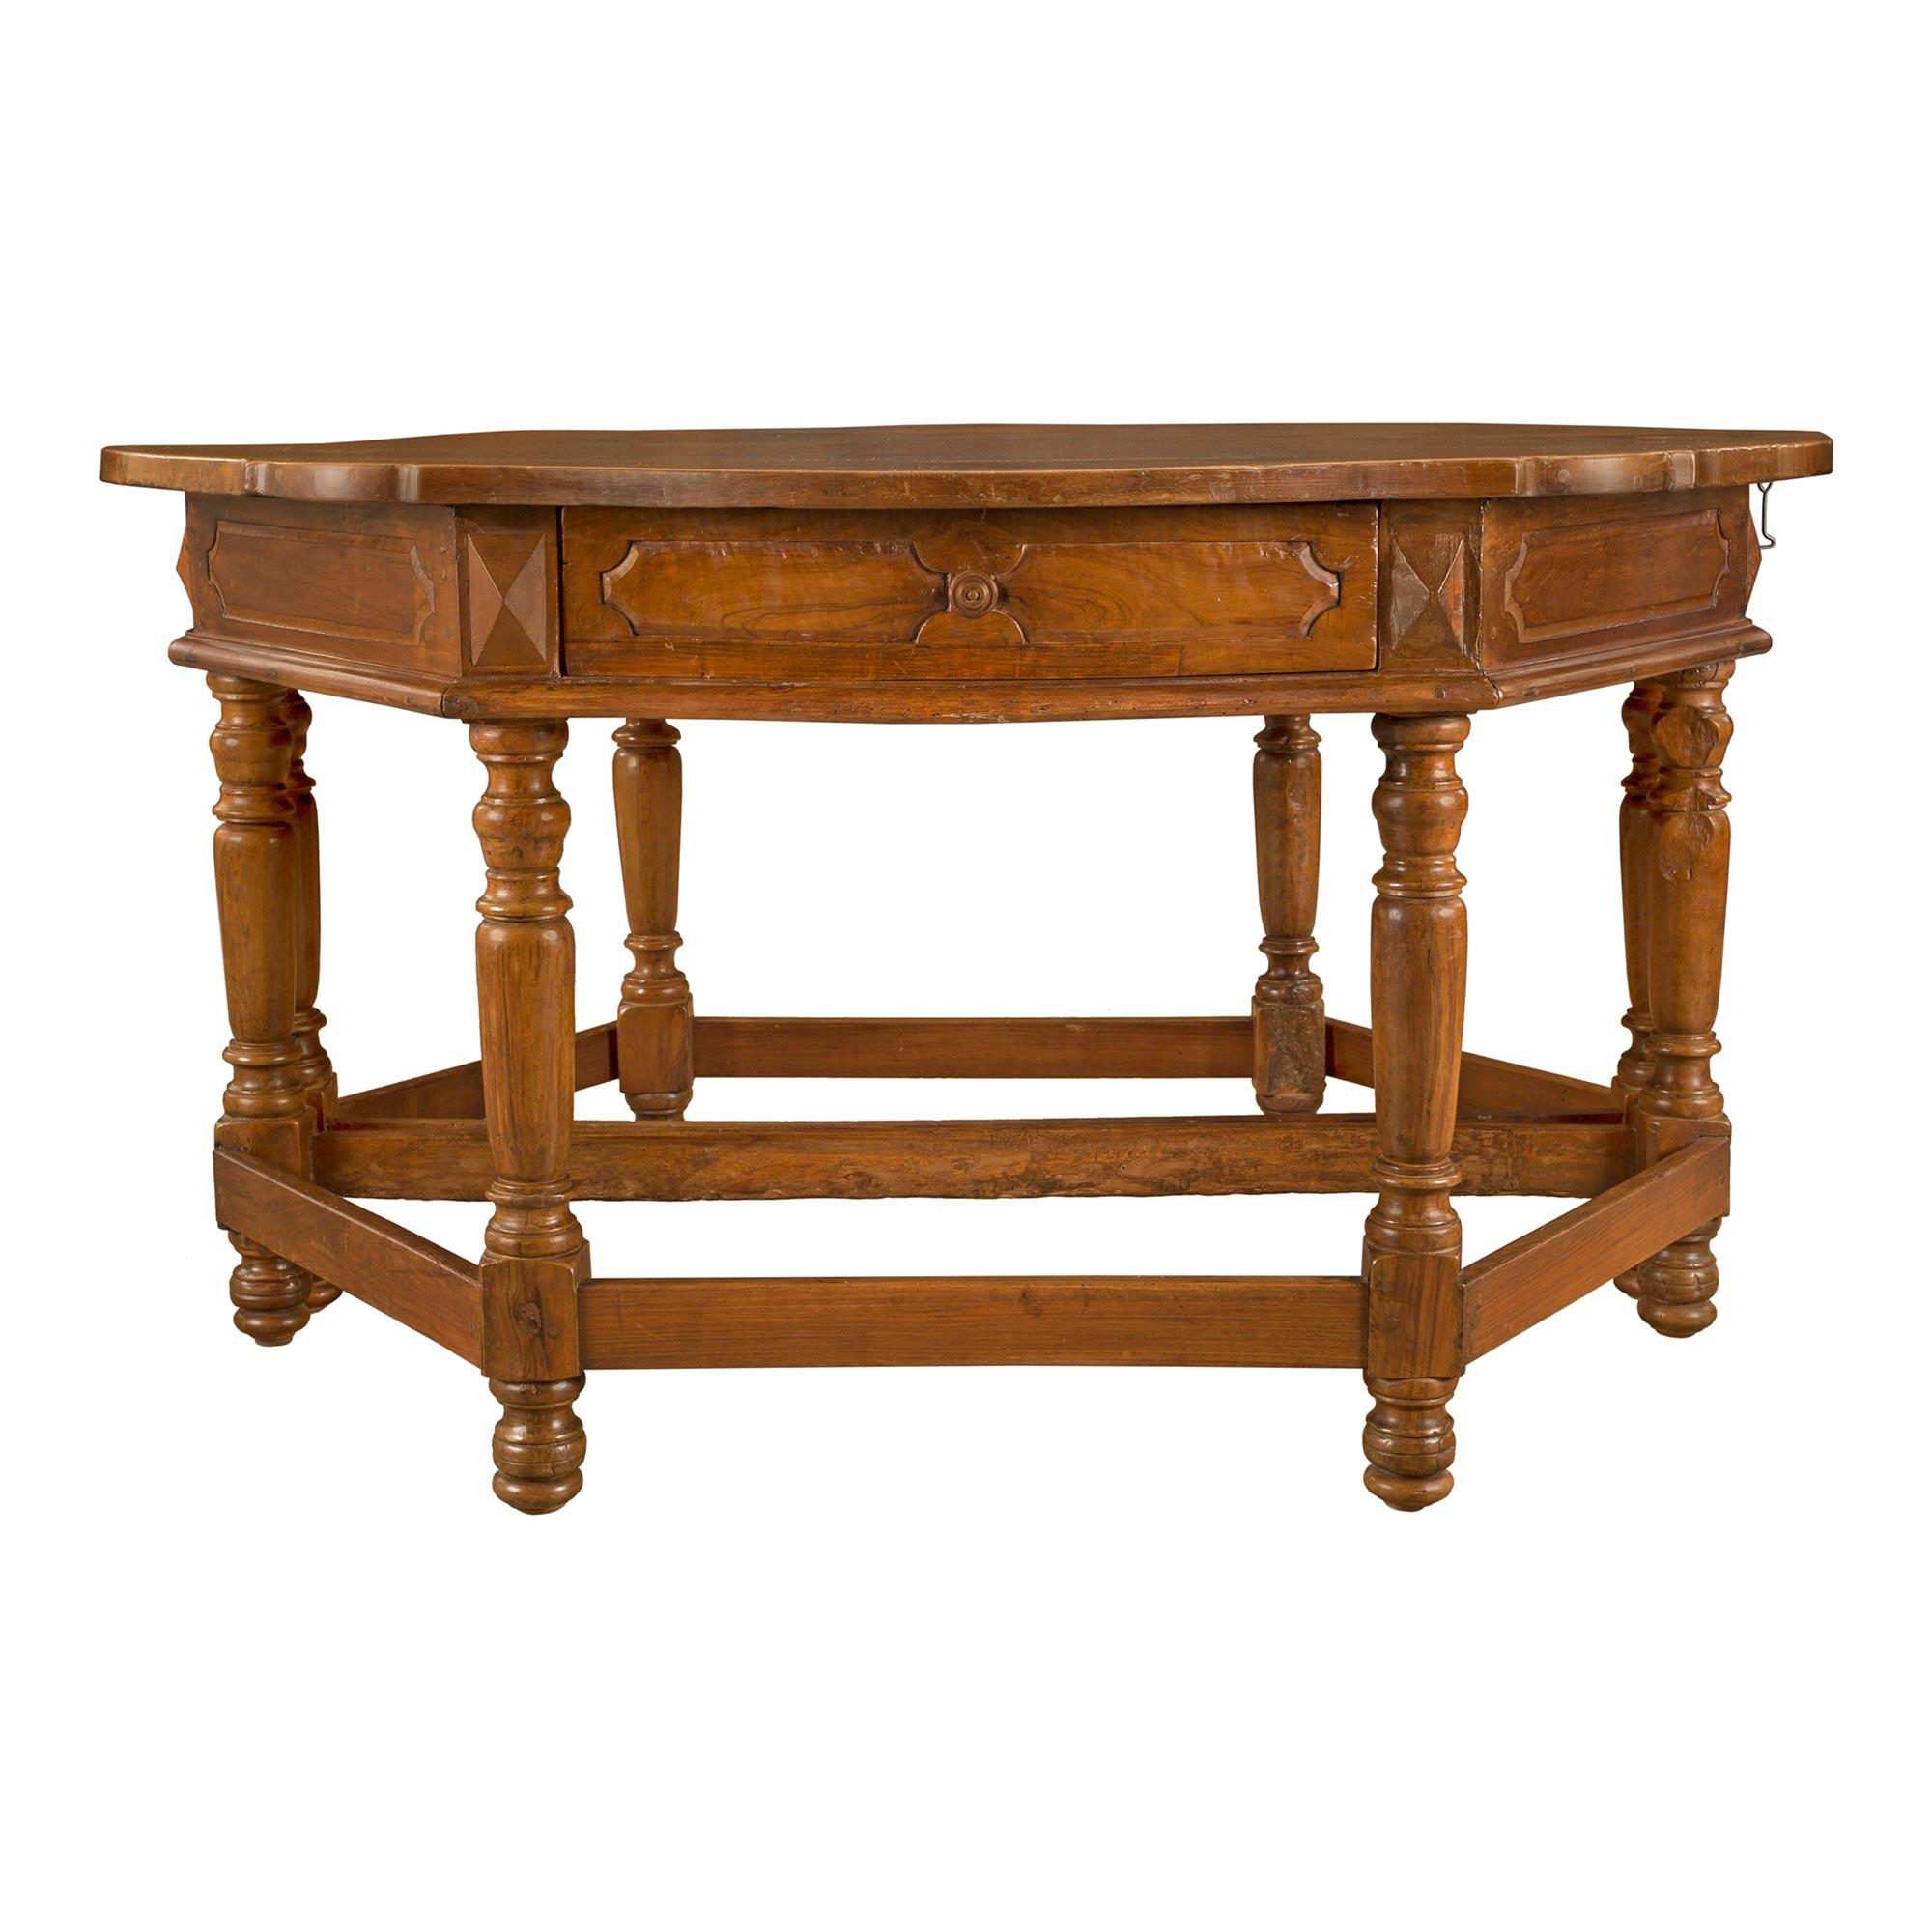 A very handsome pair of Italian 17th century Louis XVI period walnut consoles / center table from Tuscany. Each console is raised on four turned legs with topie shaped feet joined by a straight stretcher. The rounded apron has a central drawer with